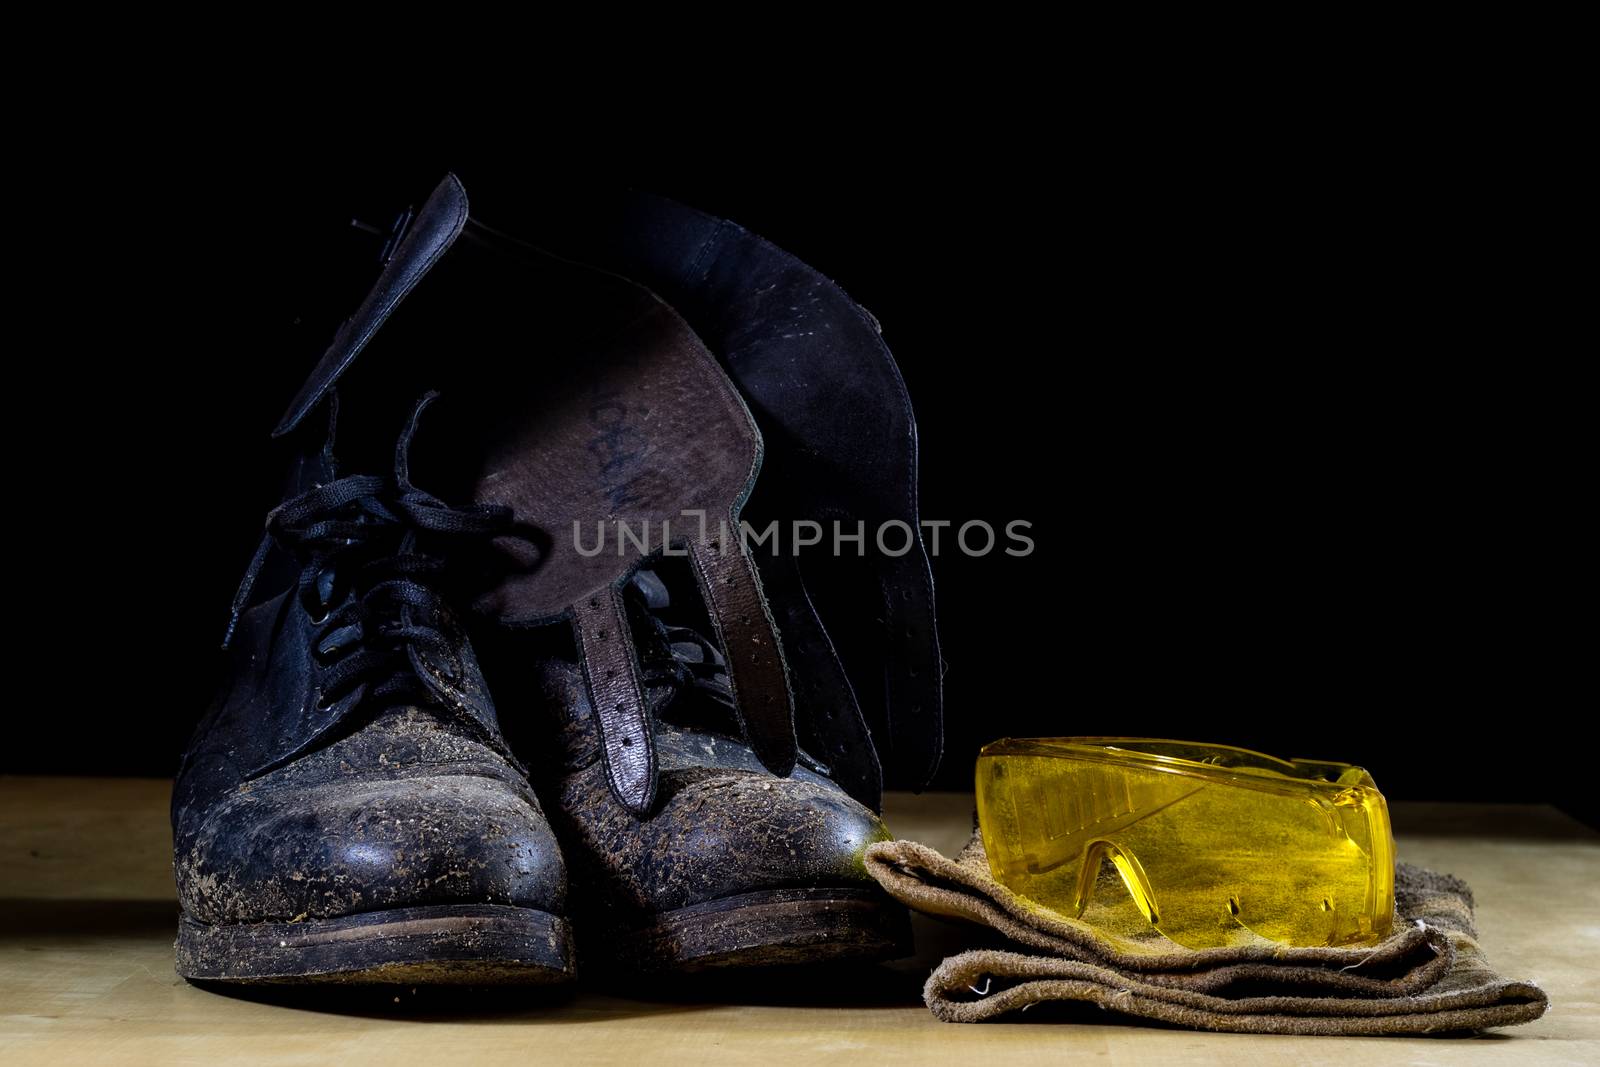 Workwear for a construction worker. Helmet, gloves, shoes and su by wytrazek